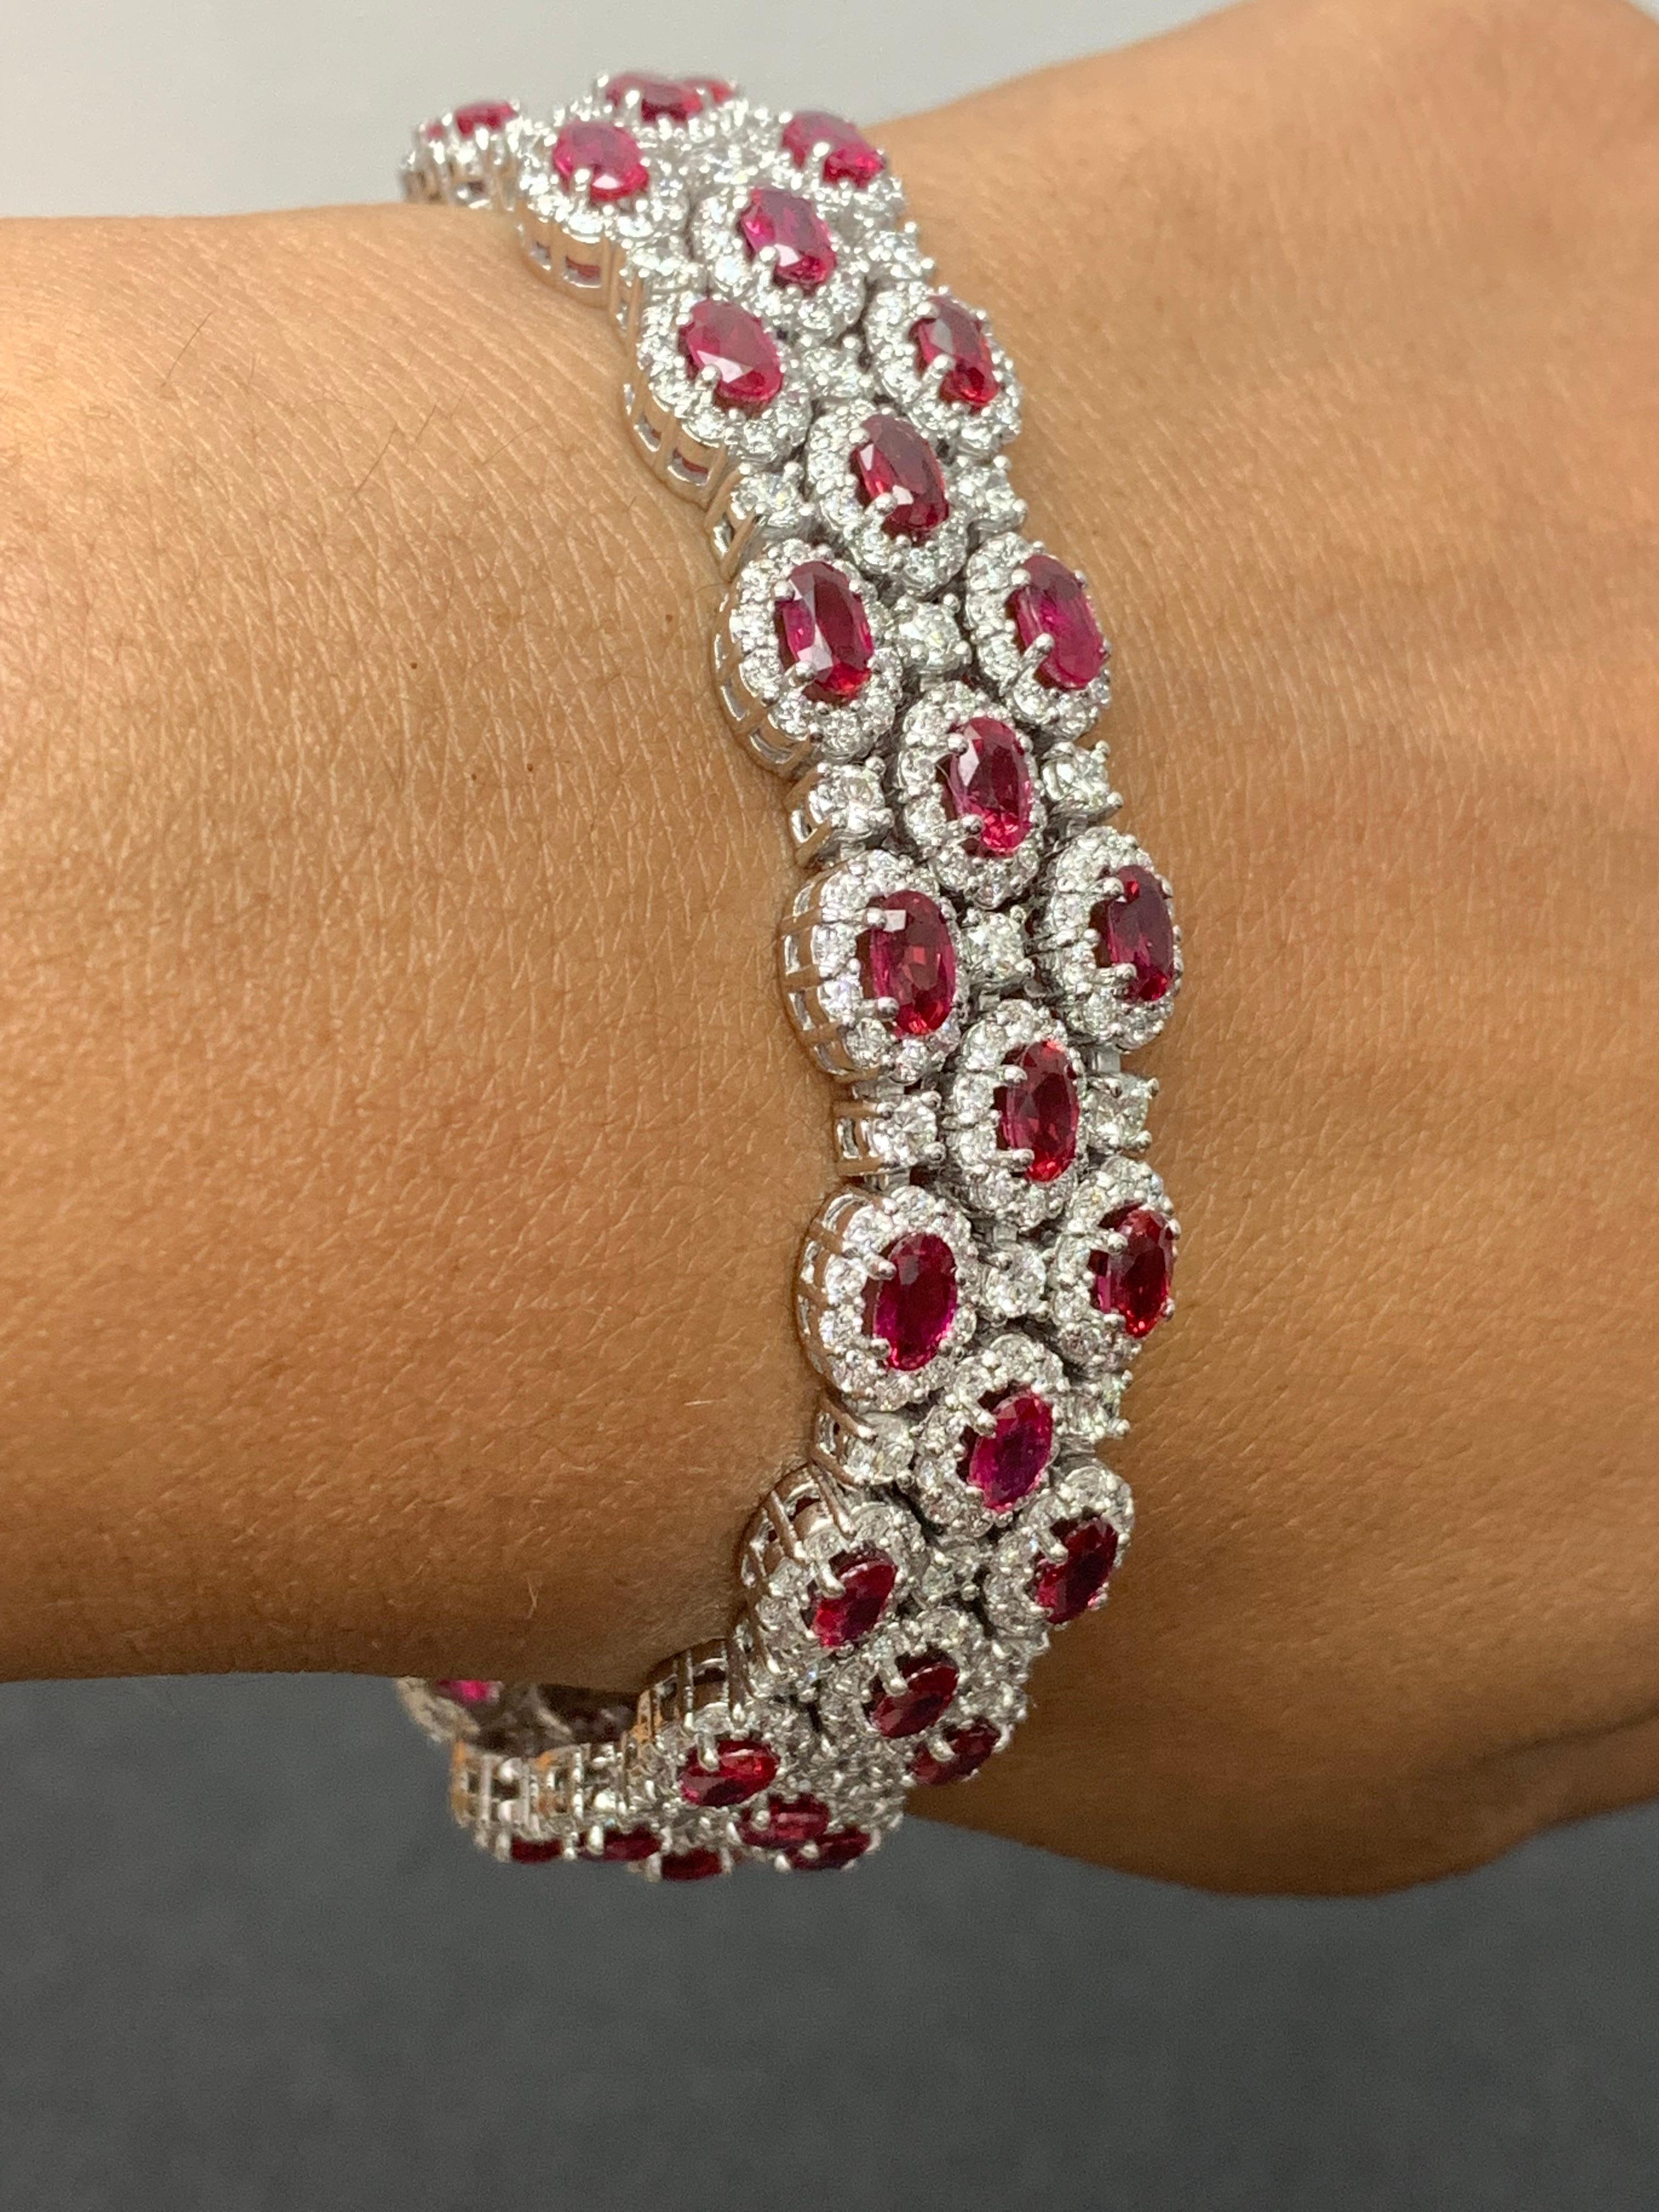 14.91 Carat Oval Cut Ruby and Diamond 3 Row Bracelet in 14K White Gold For Sale 2